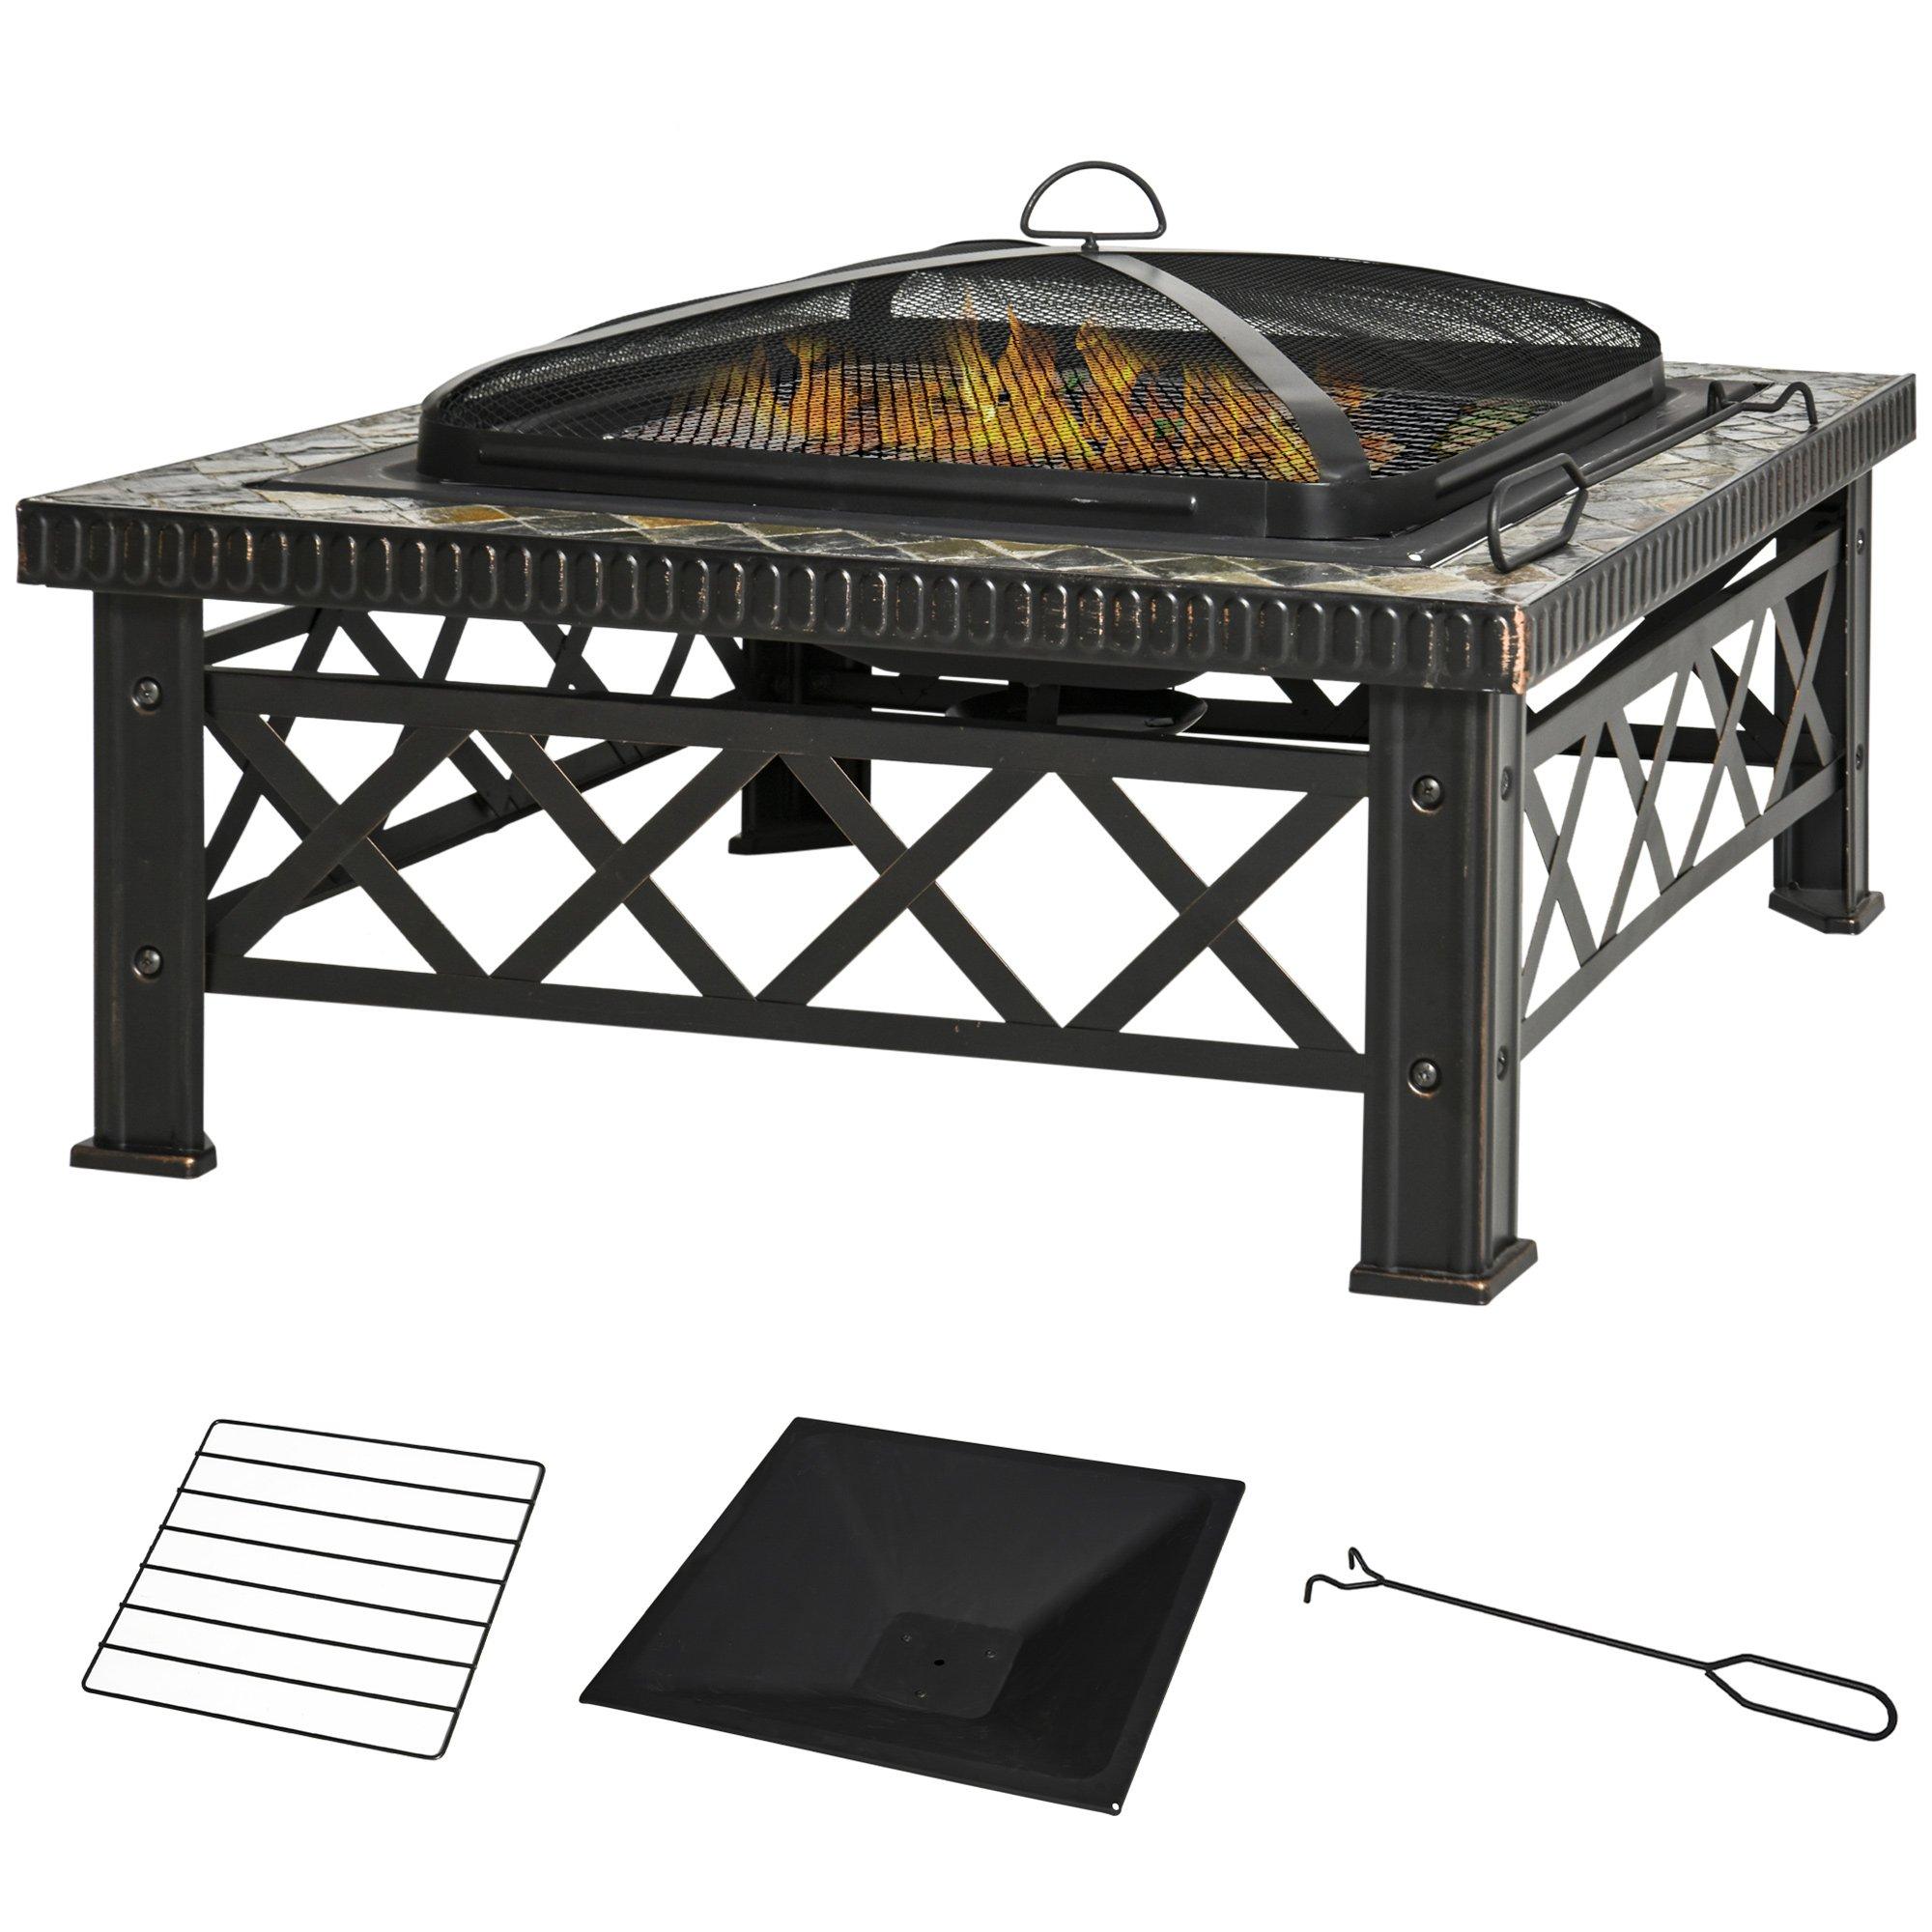 76cm Square Garden Fire Pit Square Table w/ Poker Cover Log Grate